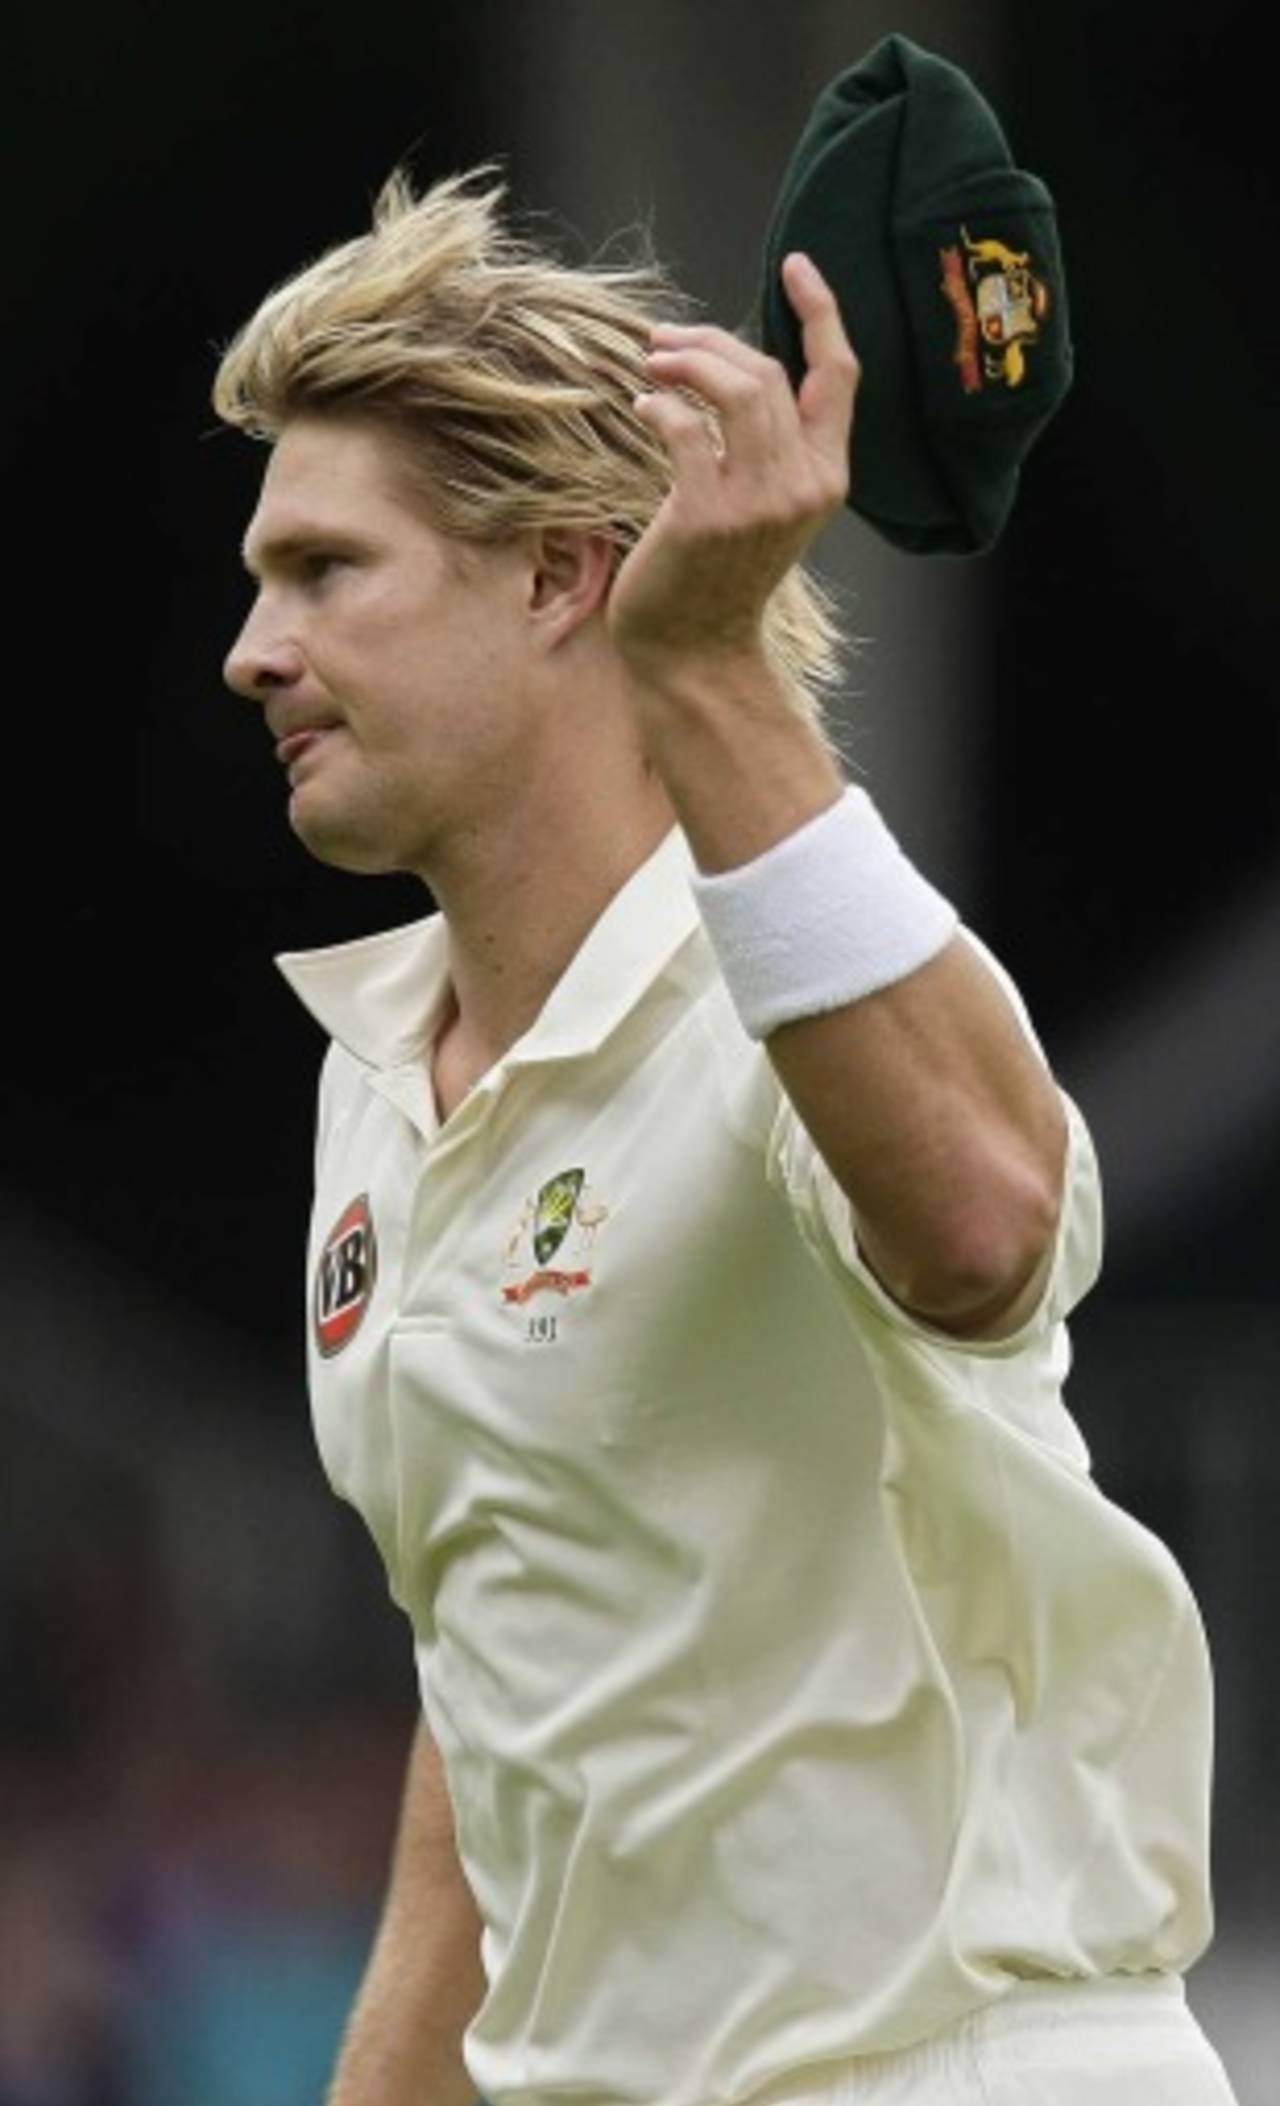 Shane Watson takes the applause of the crowd after his five-wicket haul, Pakistan v Australia, 1st Test, Lord's, July 14, 2010